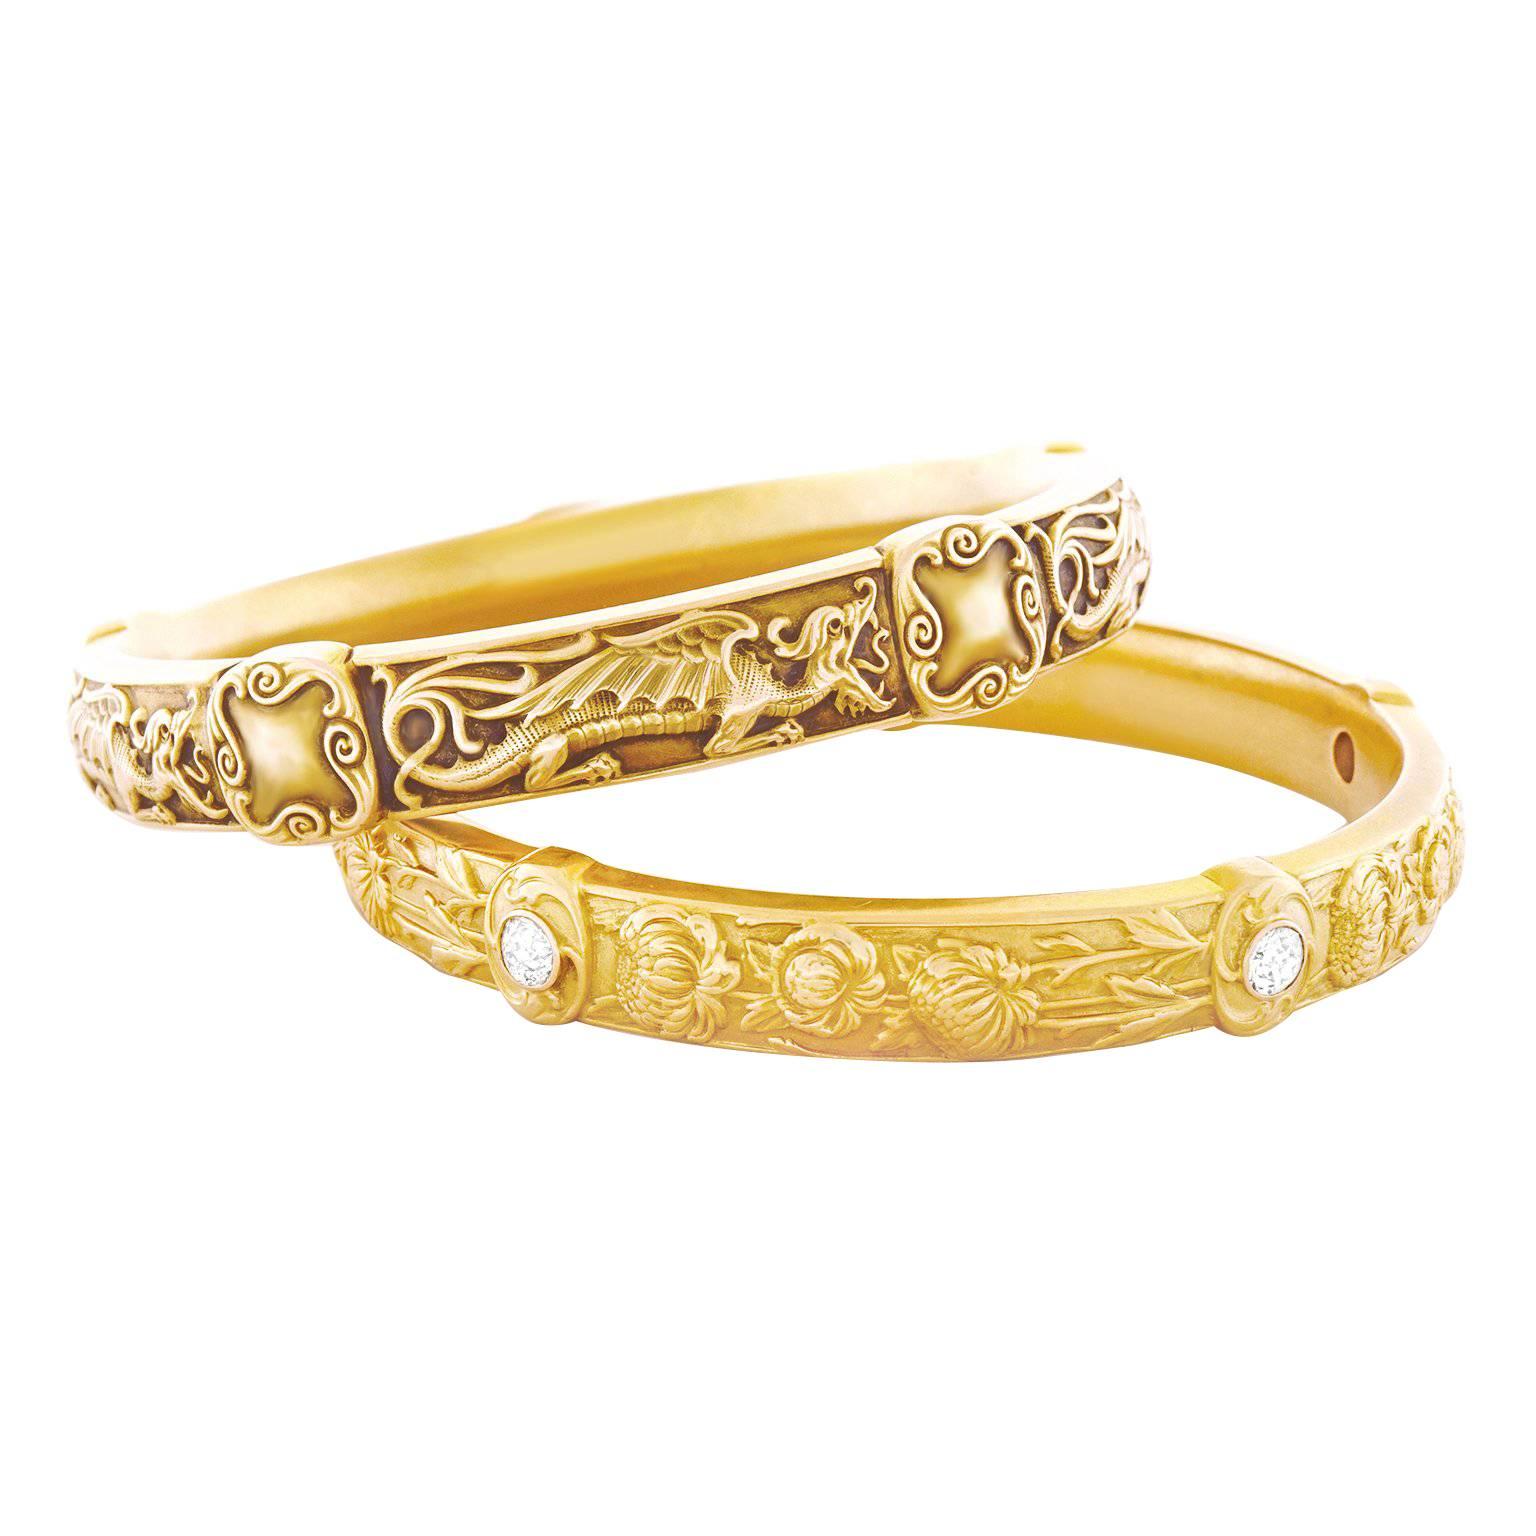 Riker Brothers Art Nouveau Pair of Gold Bangles For Sale